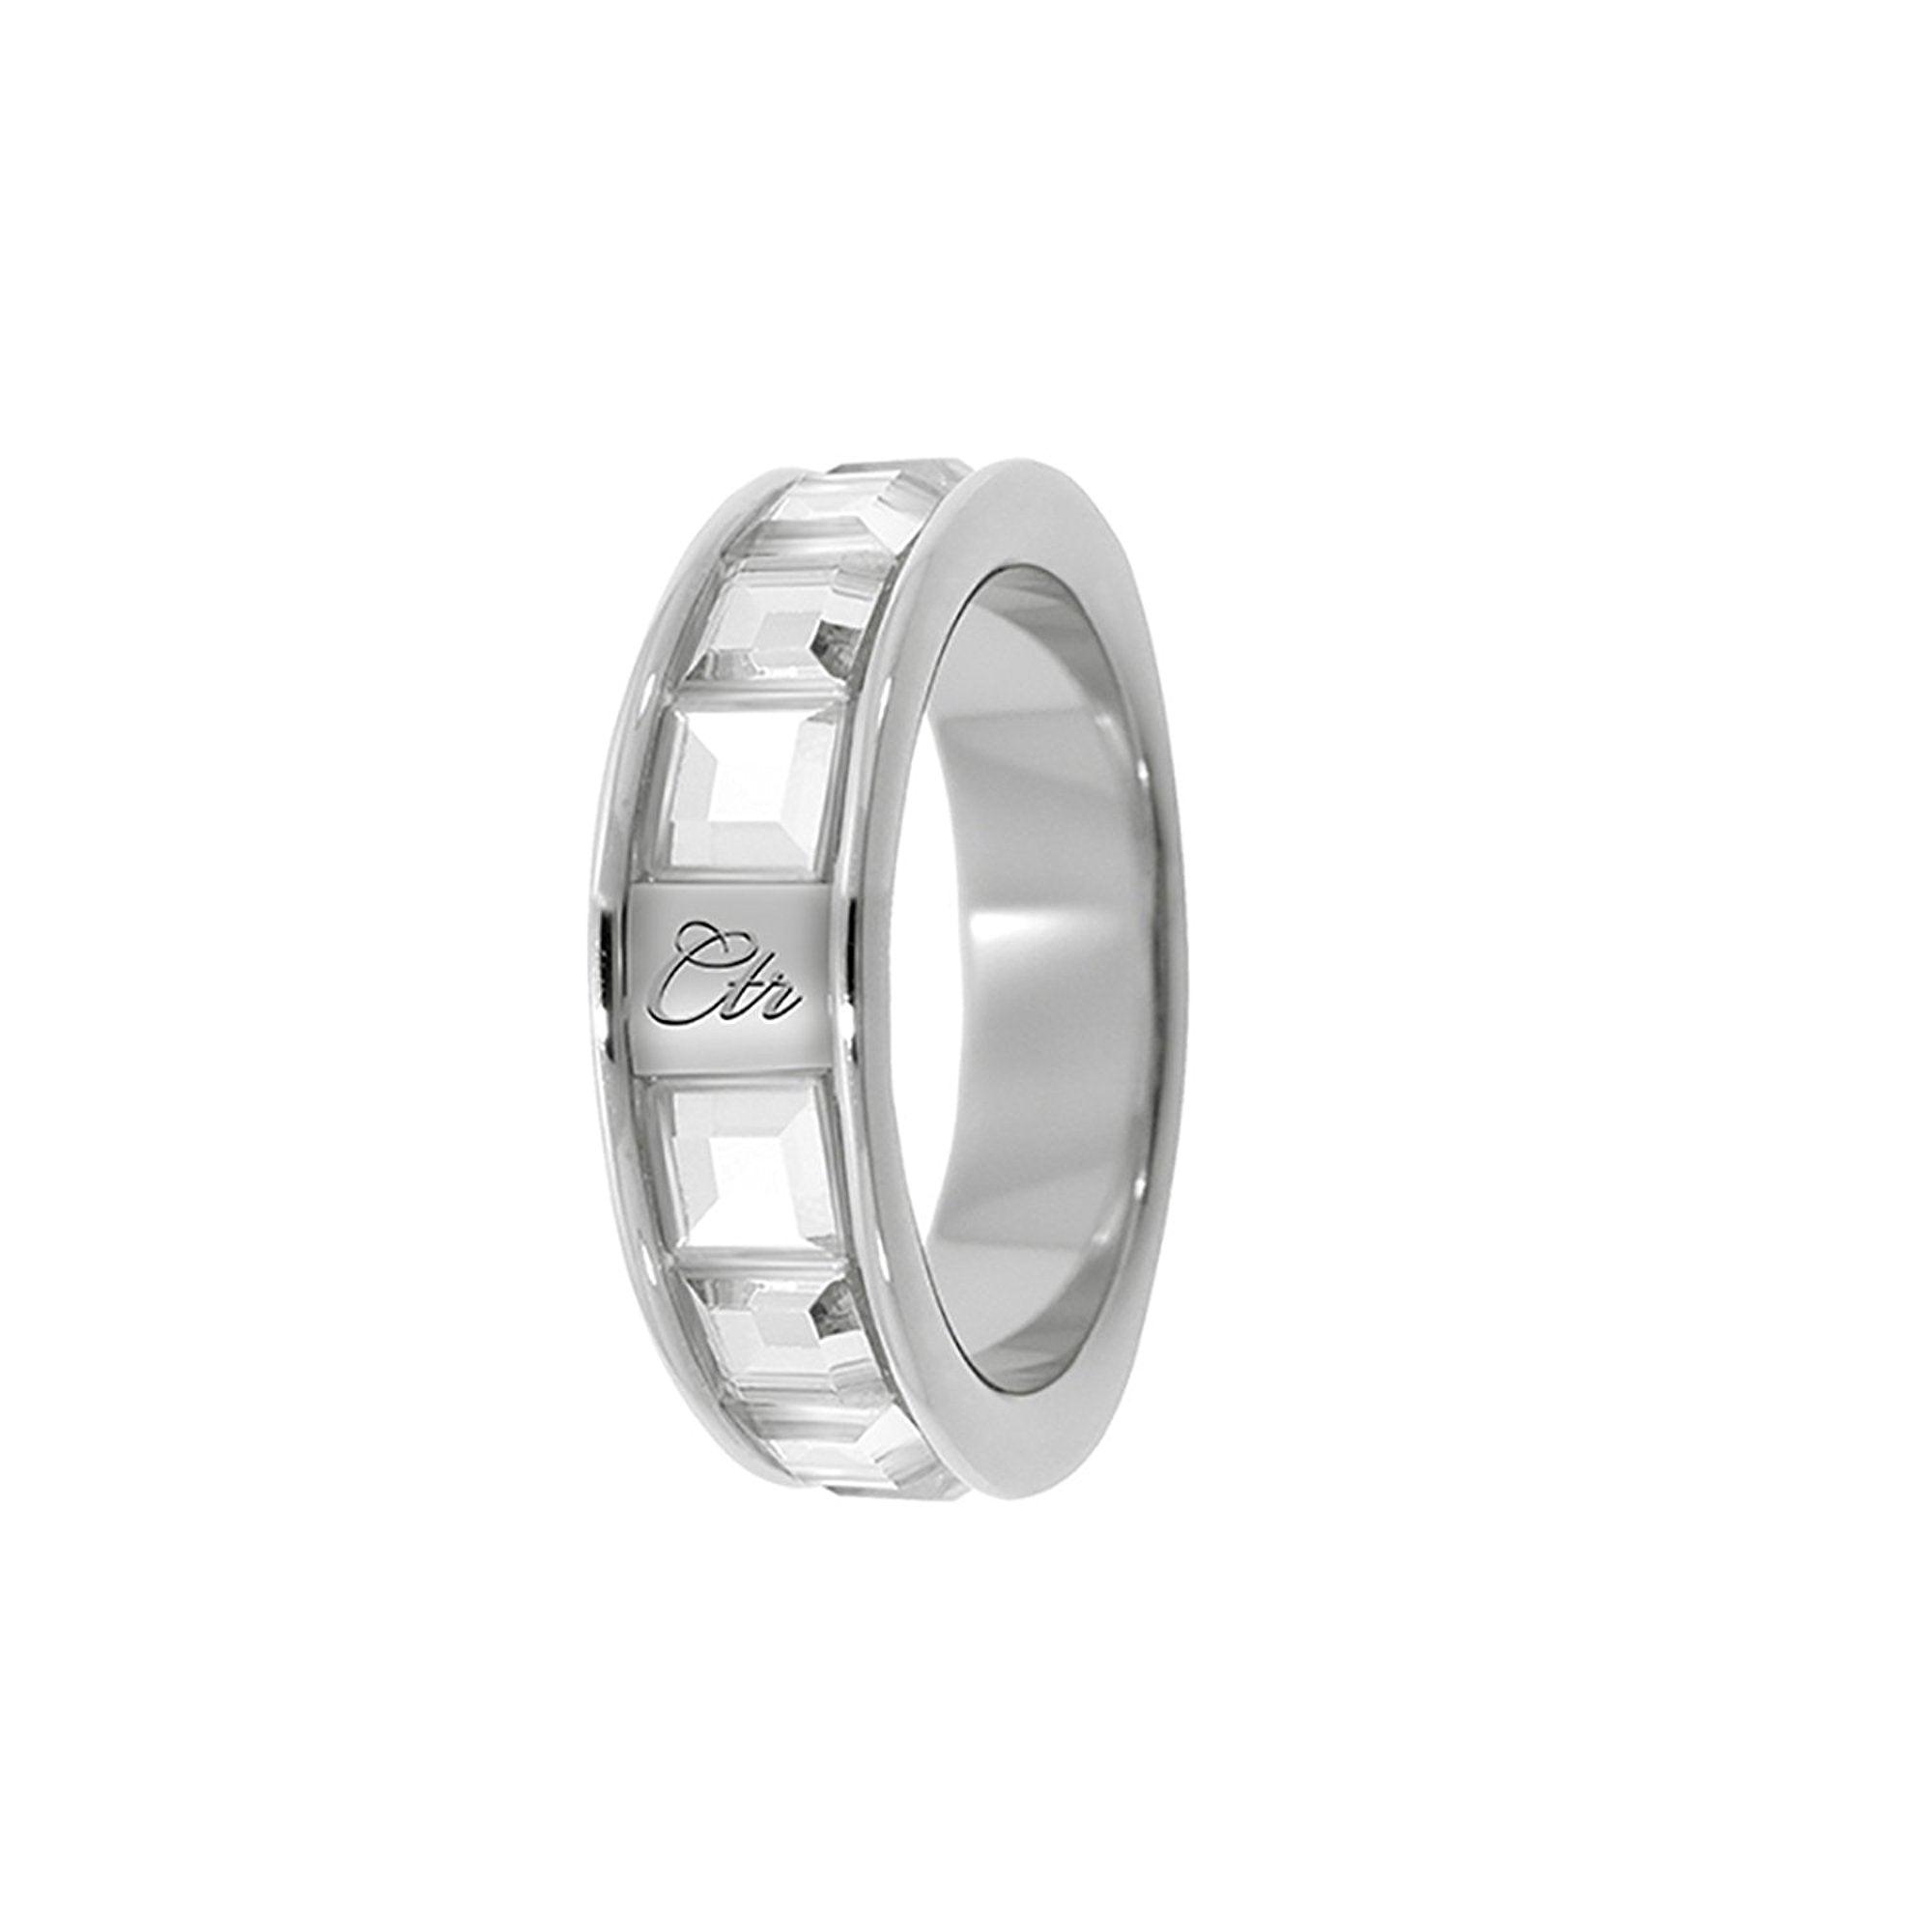 J162 CTR Ring Glimmer Stainless Steel with White CZ Stones